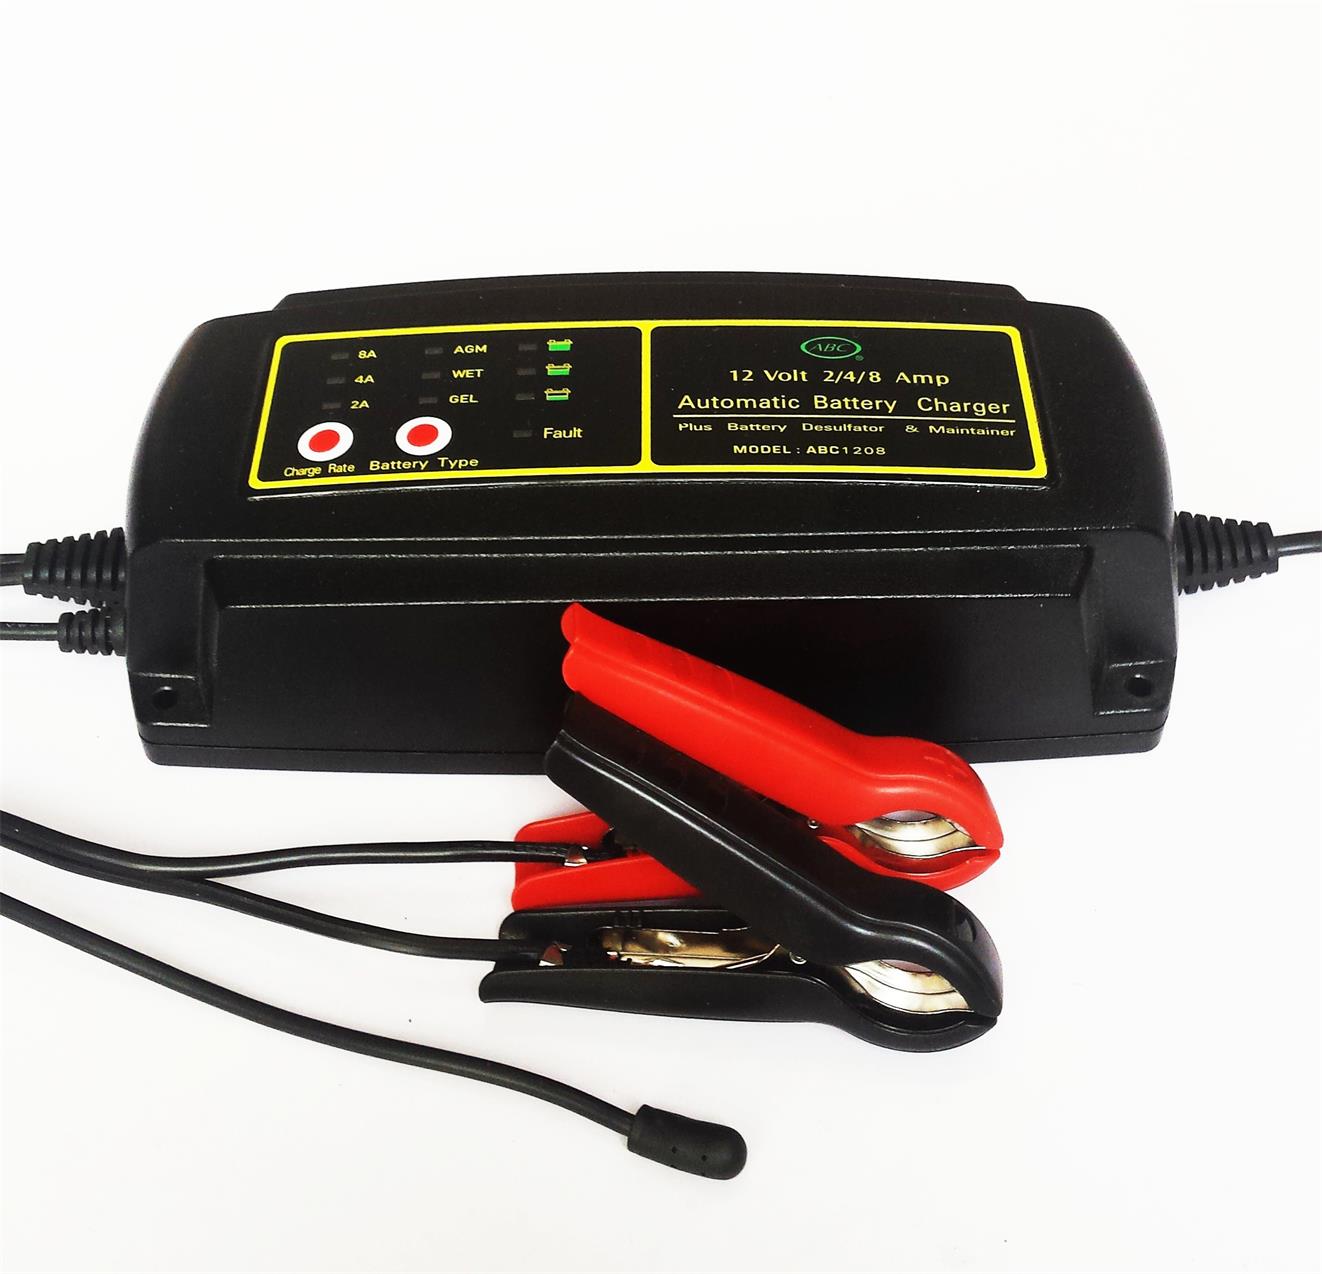 2A/4A/8A Smart Battery Charger